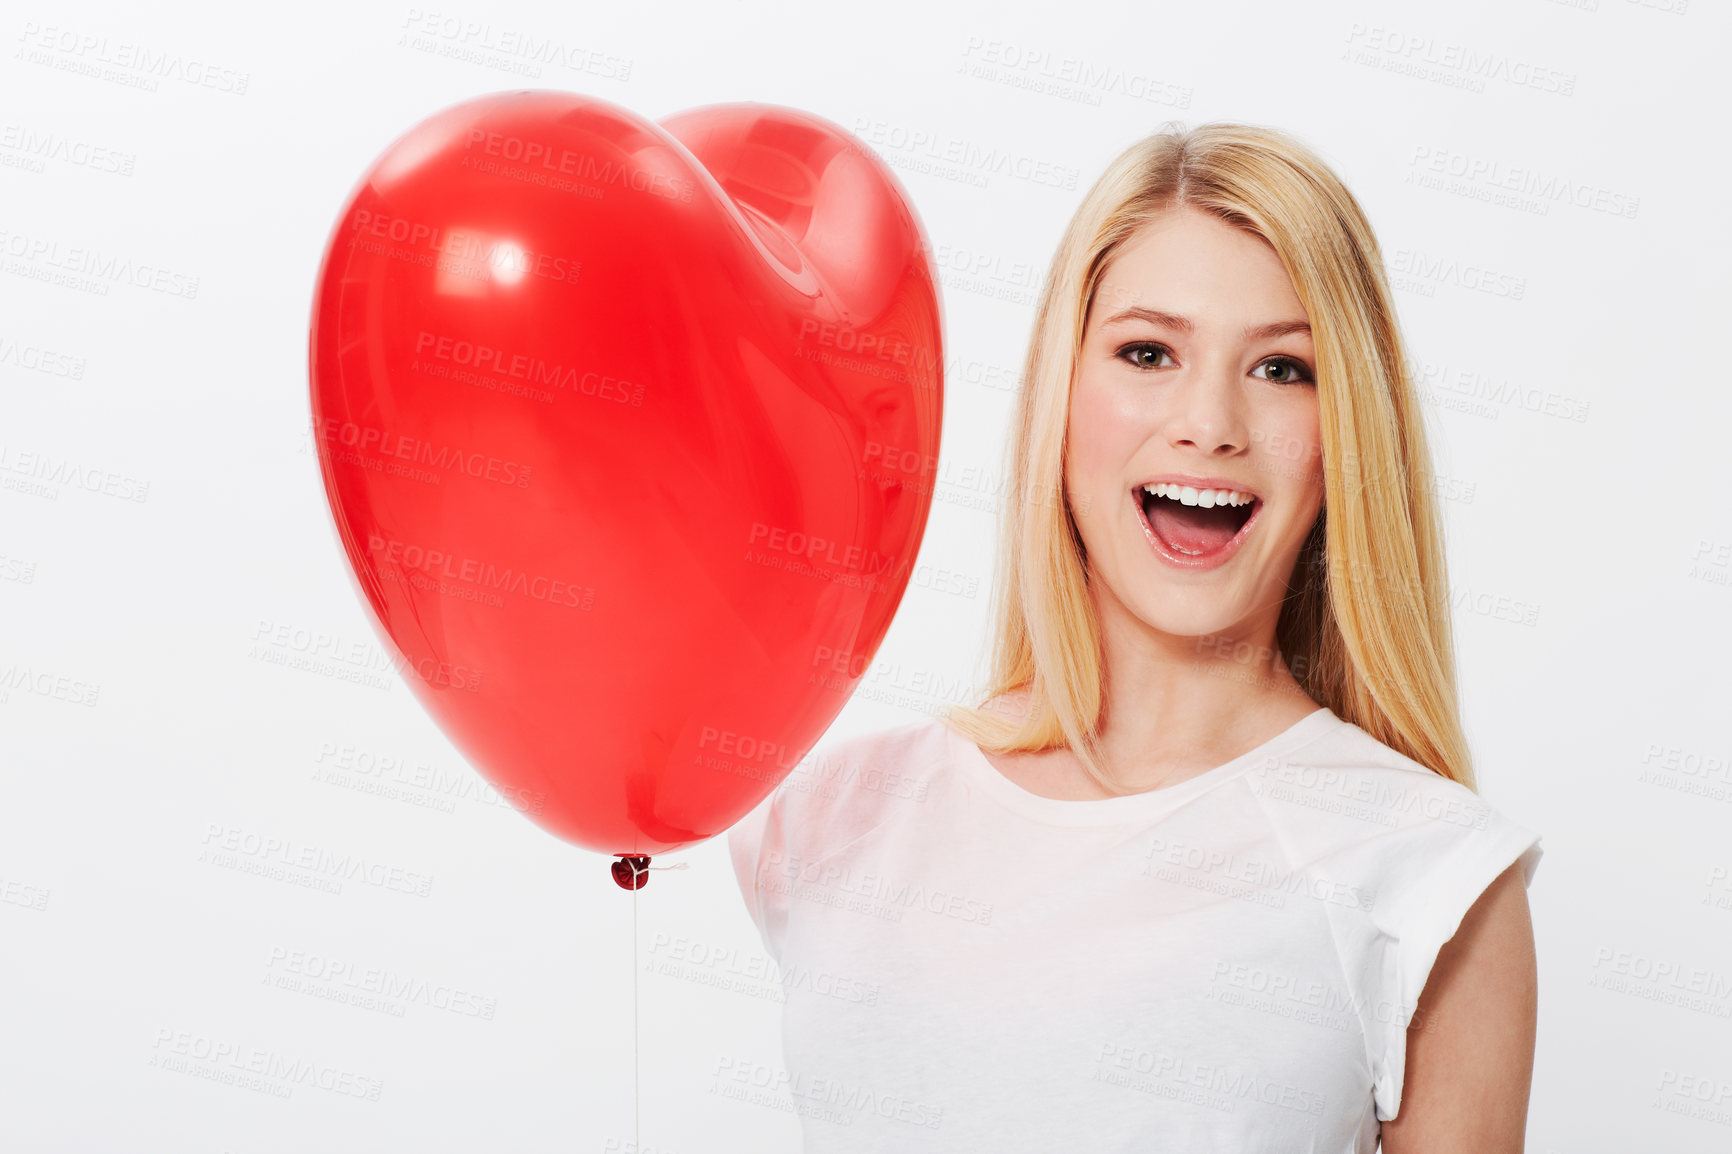 Buy stock photo A gorgeous young blonde woman holding a heart while isolated on a white background